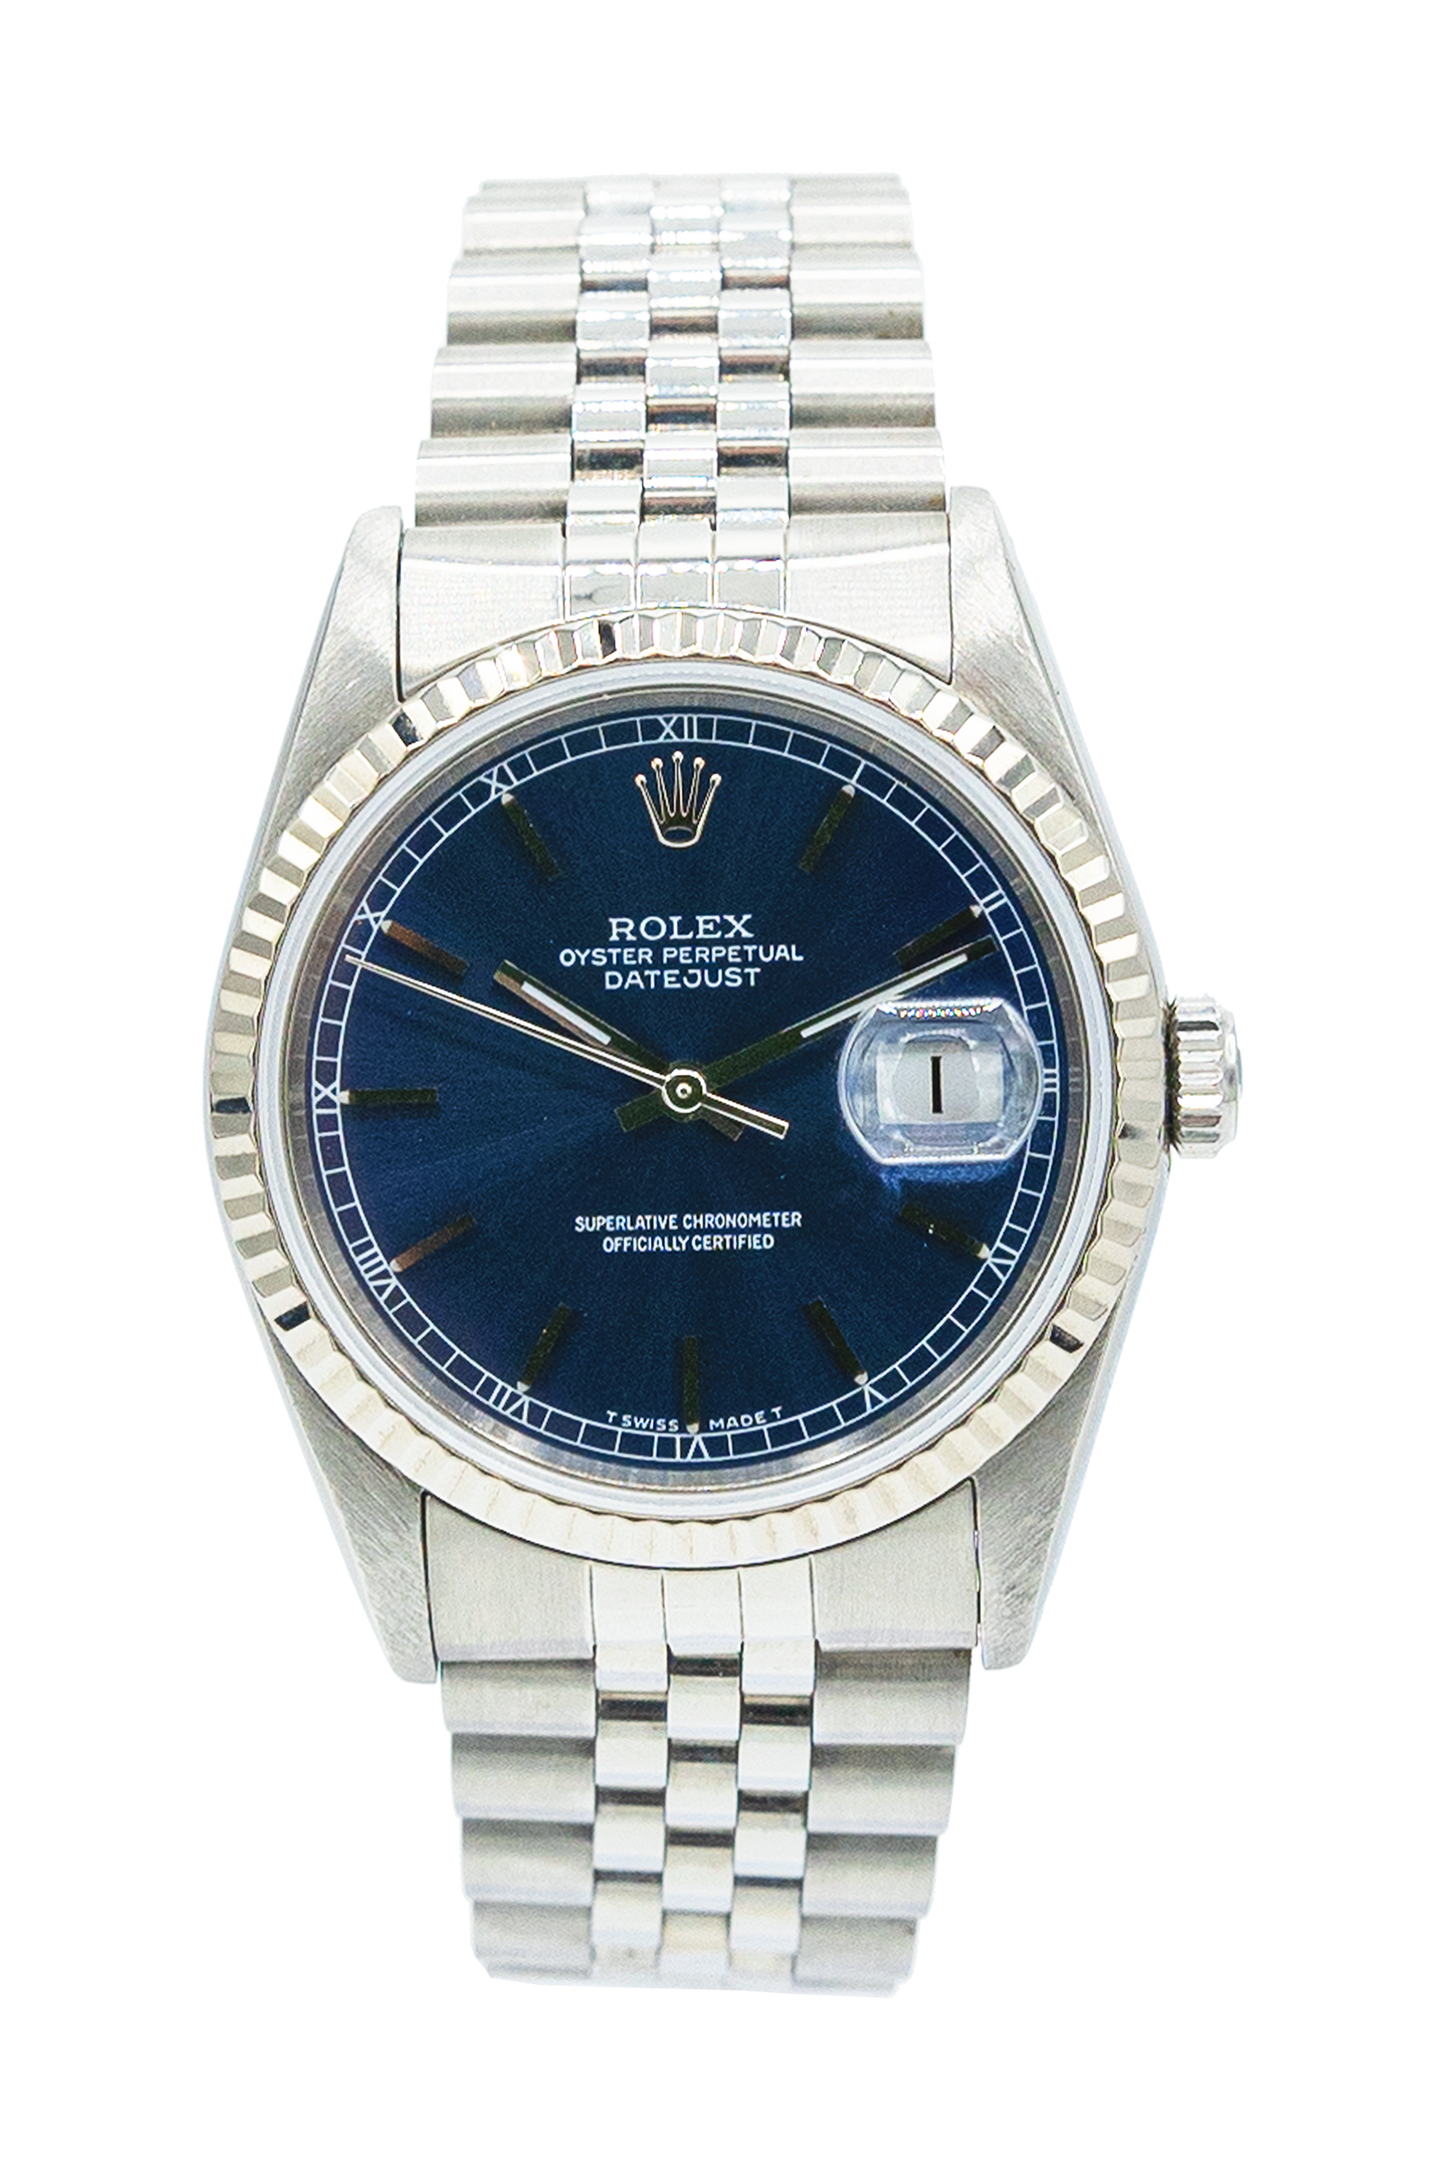 Rolex reference "16234" Datejust steel luxury watch with blue dial